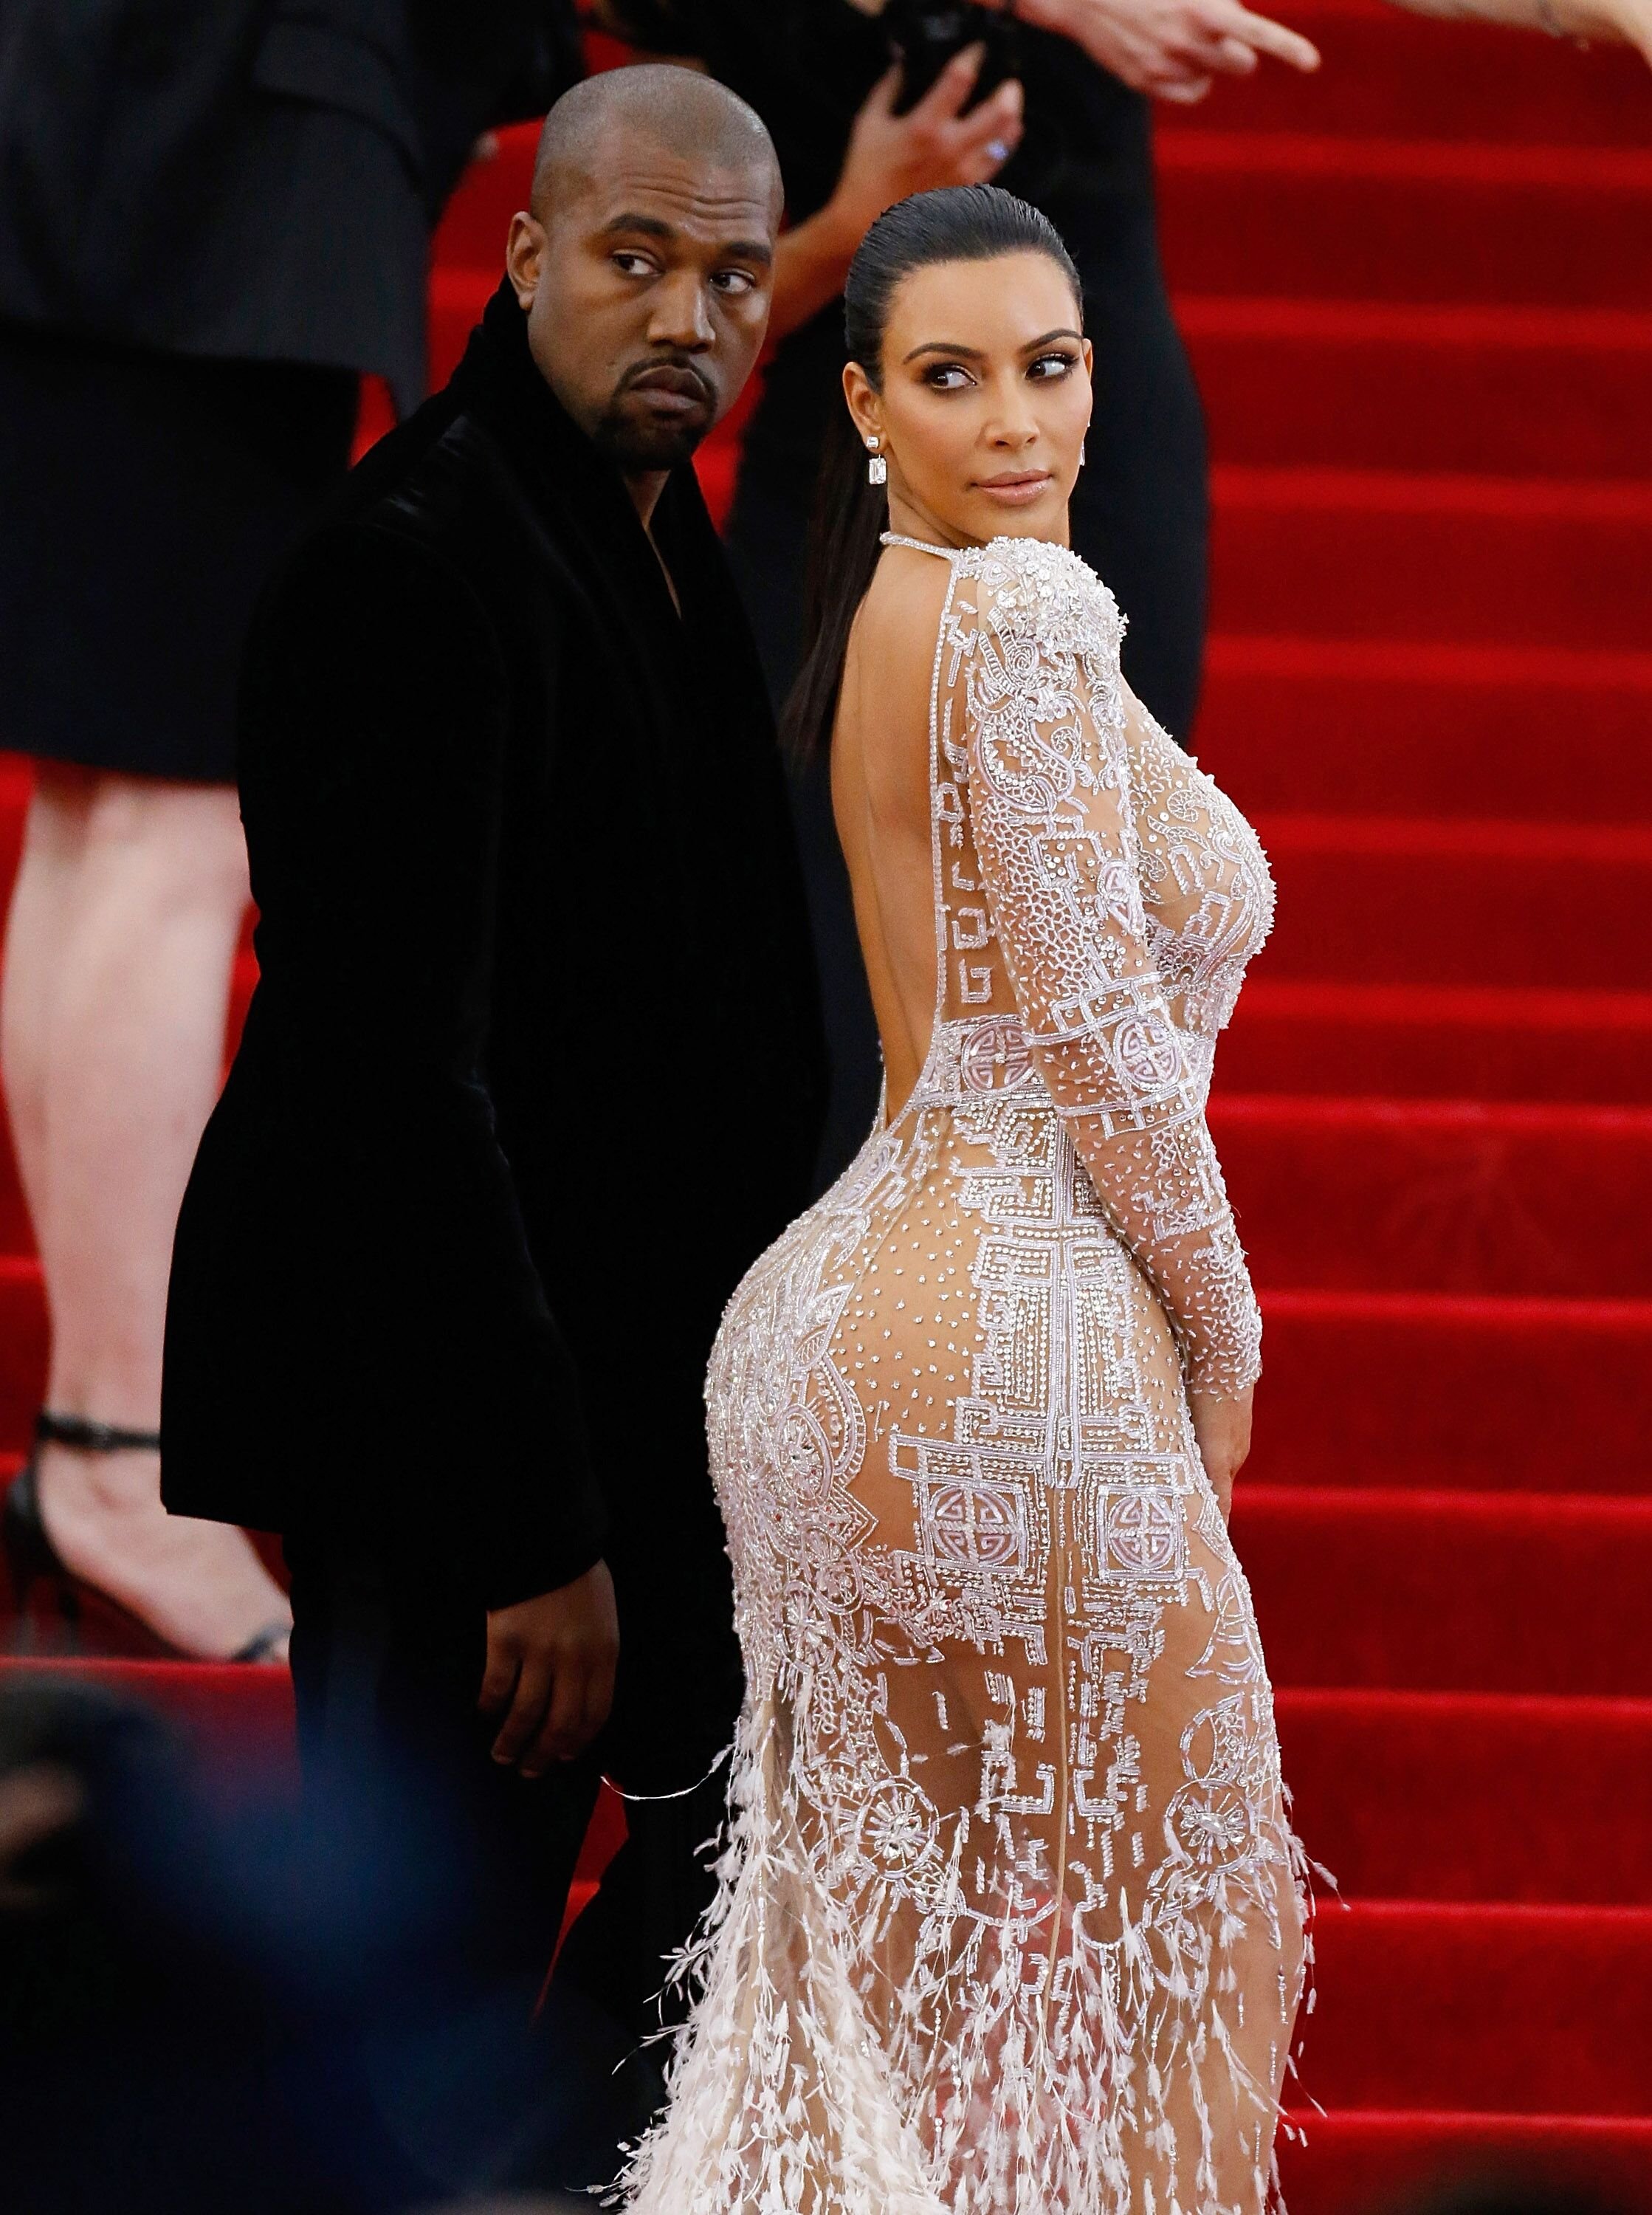 Kanye West & Kim Kardashian West at the Met Gala in 2015 in New York | Source: Getty Images